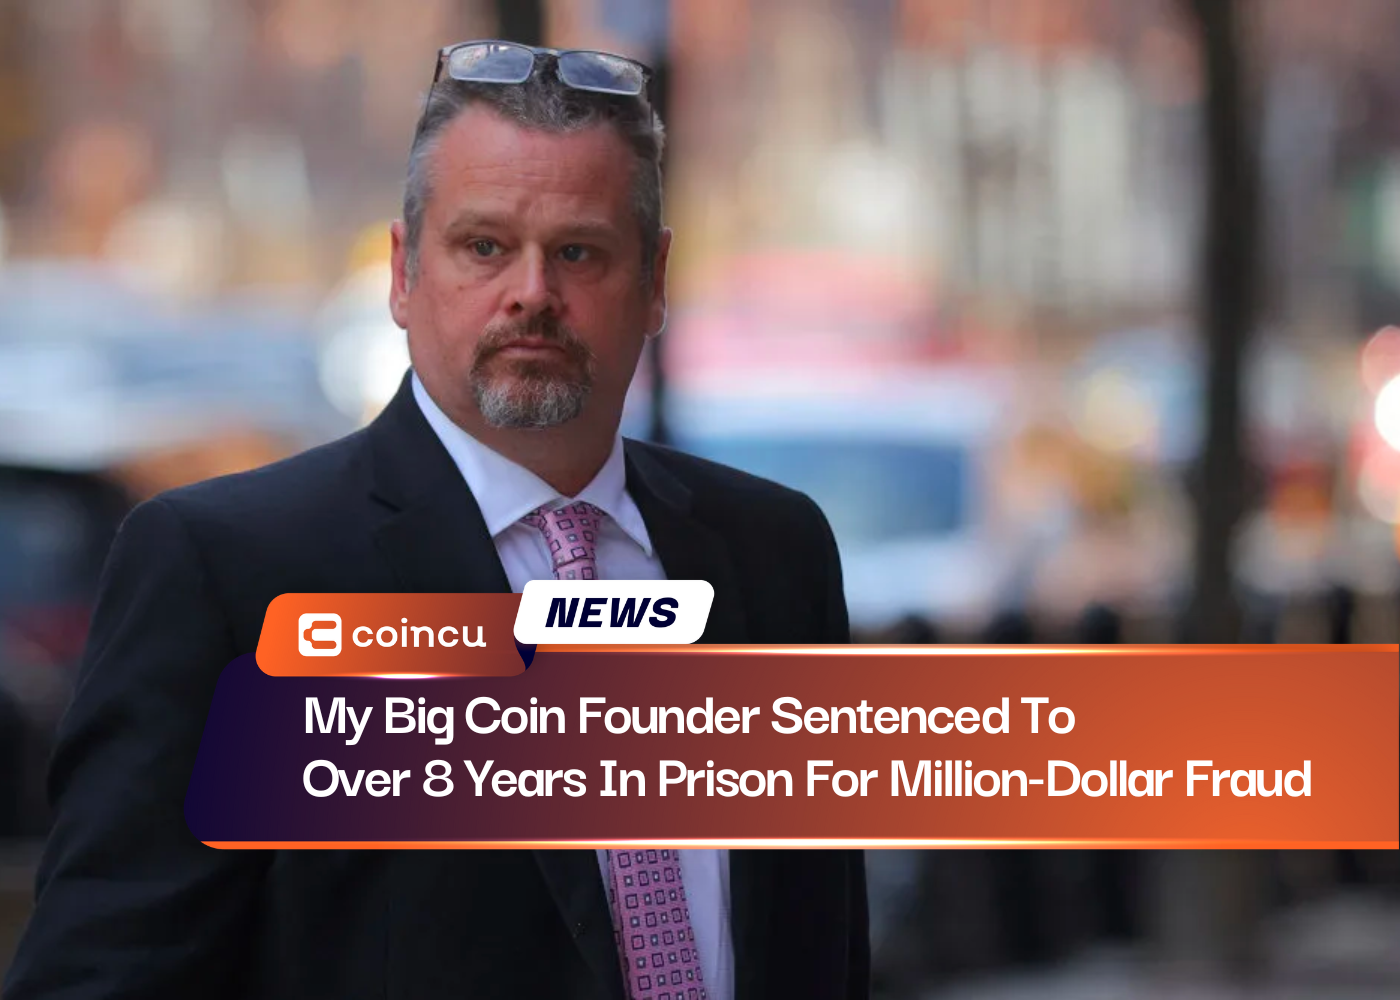 My Big Coin Founder Sentenced To Over 8 Years In Prison For Million-Dollar Fraud